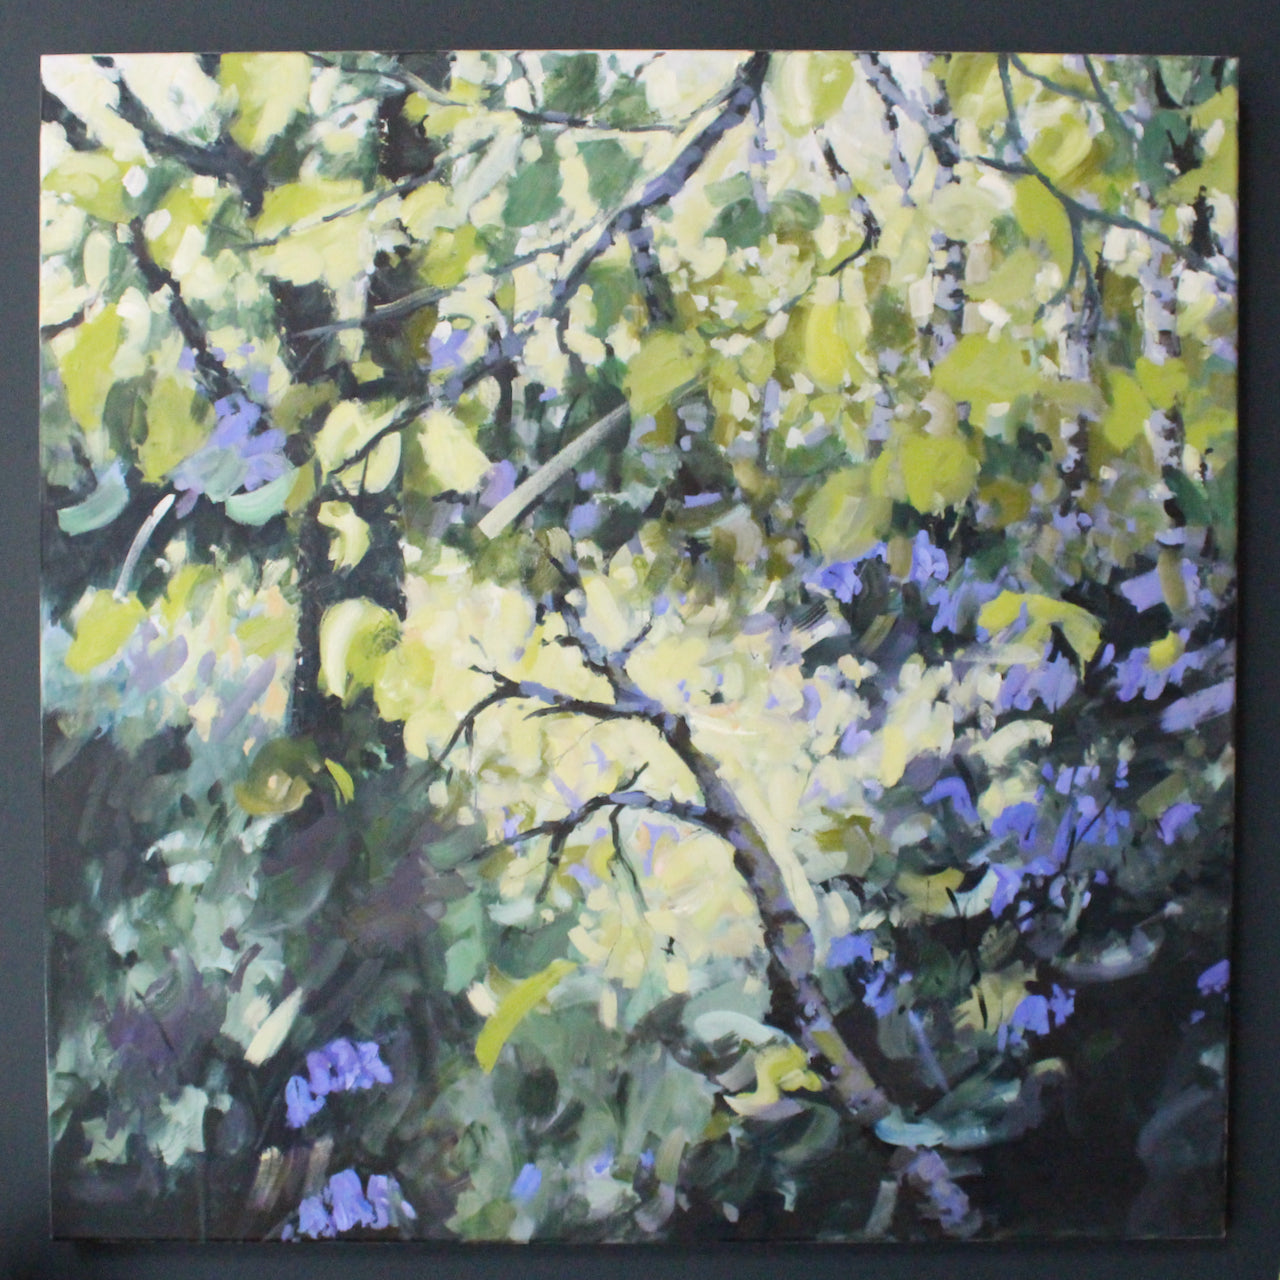 An oil painting of bluebells in a wood by artist Jill Hudson.